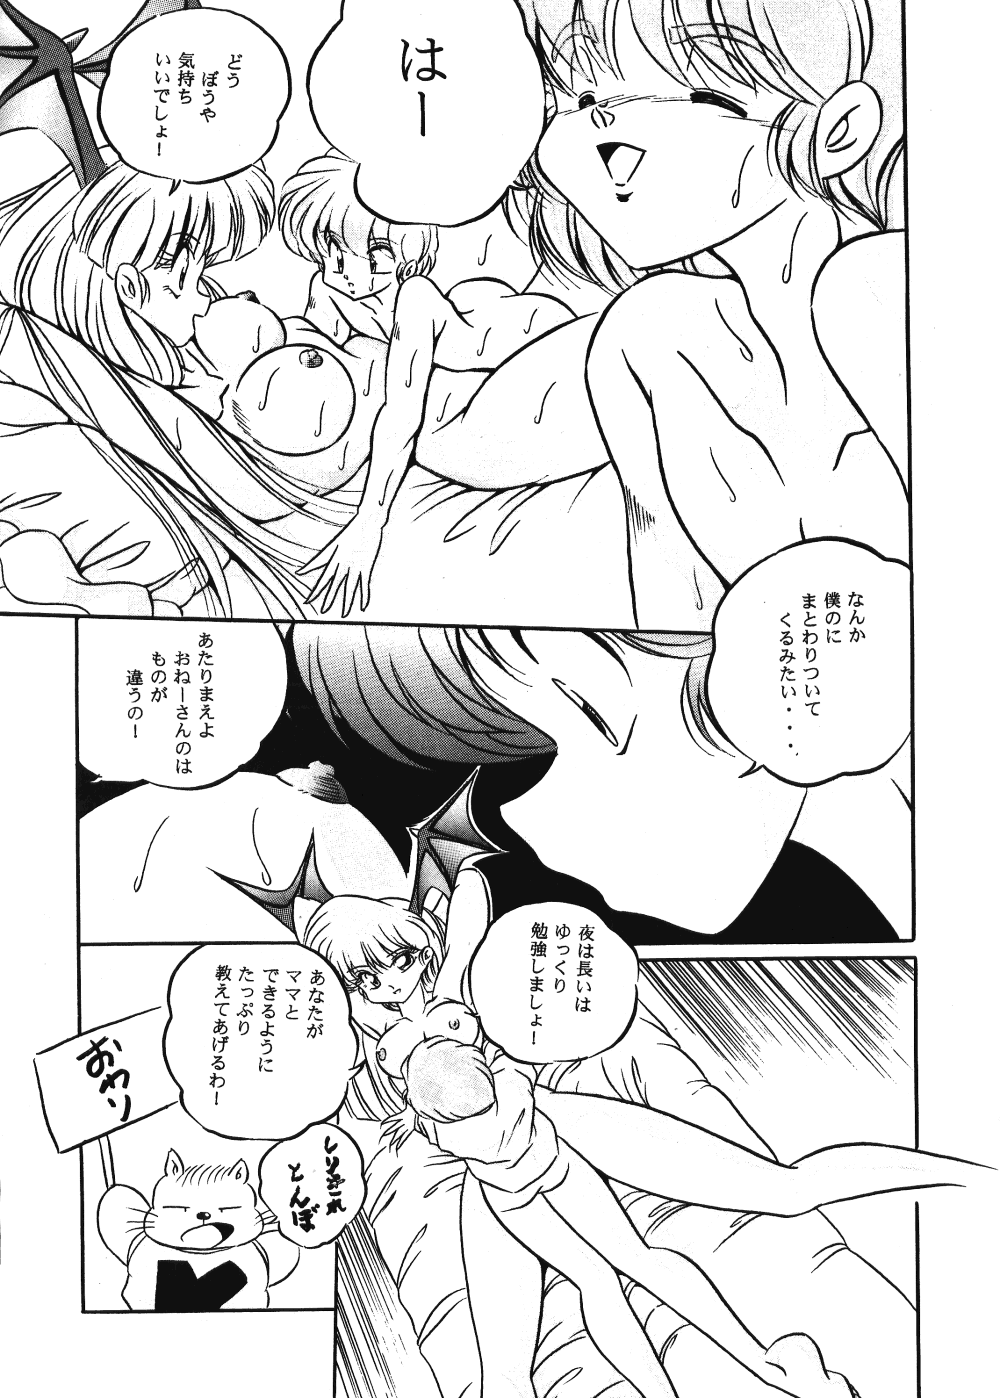 [C-Company] C-COMPANY SPECIAL STAGE 15 (Darkstalkers, Ranma 1/2) page 35 full